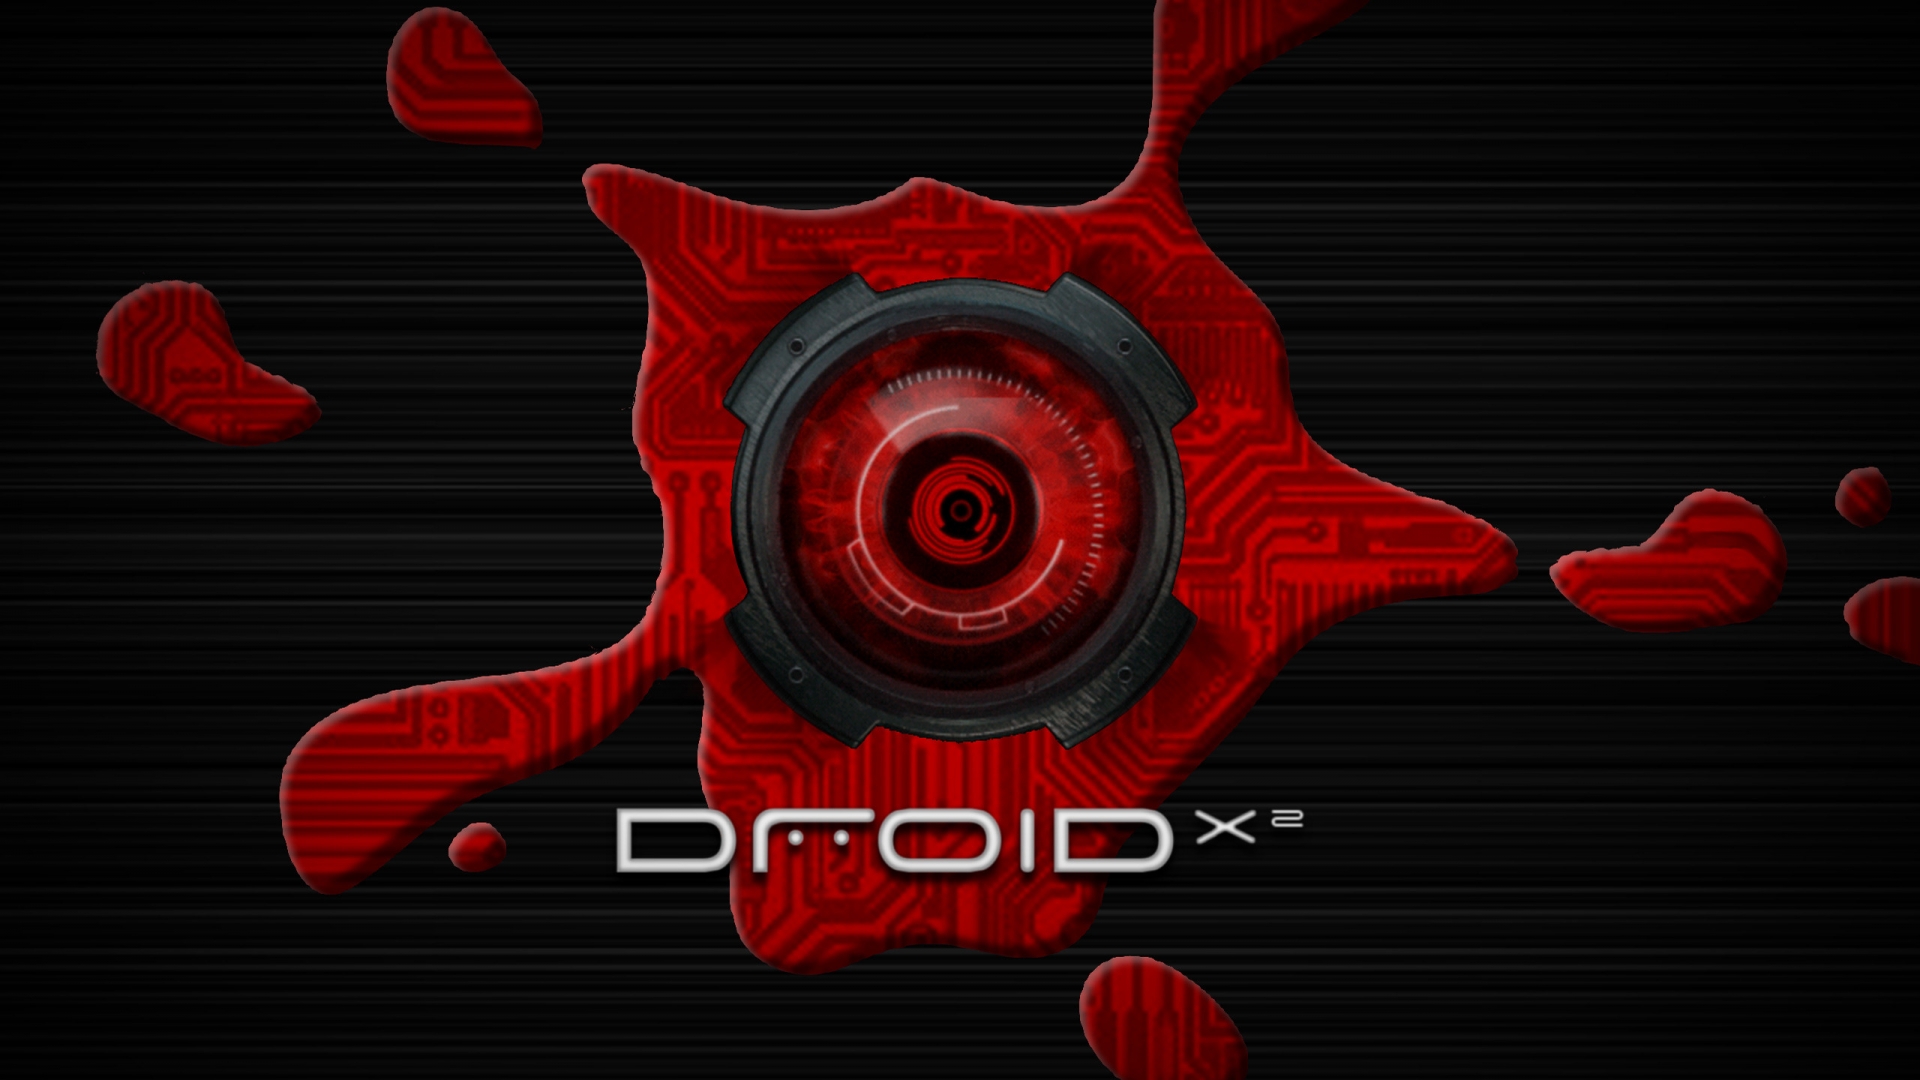 Droid X2 Splat for 1920 x 1080 HDTV 1080p resolution